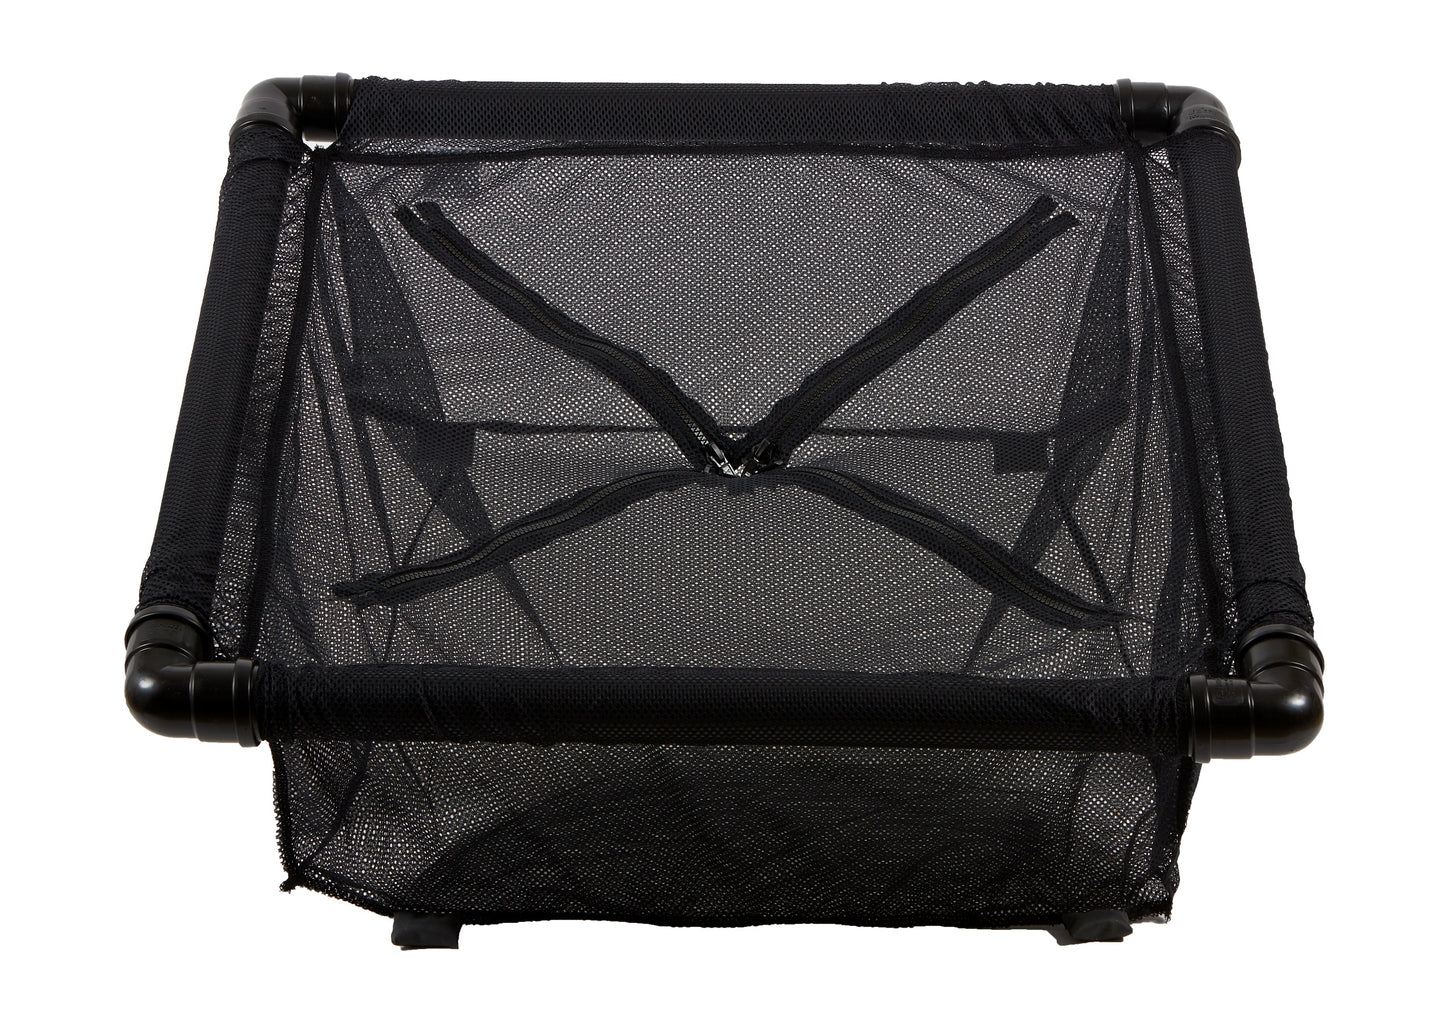 2ft x 2ft x 2ft Japanese style containment zip cage